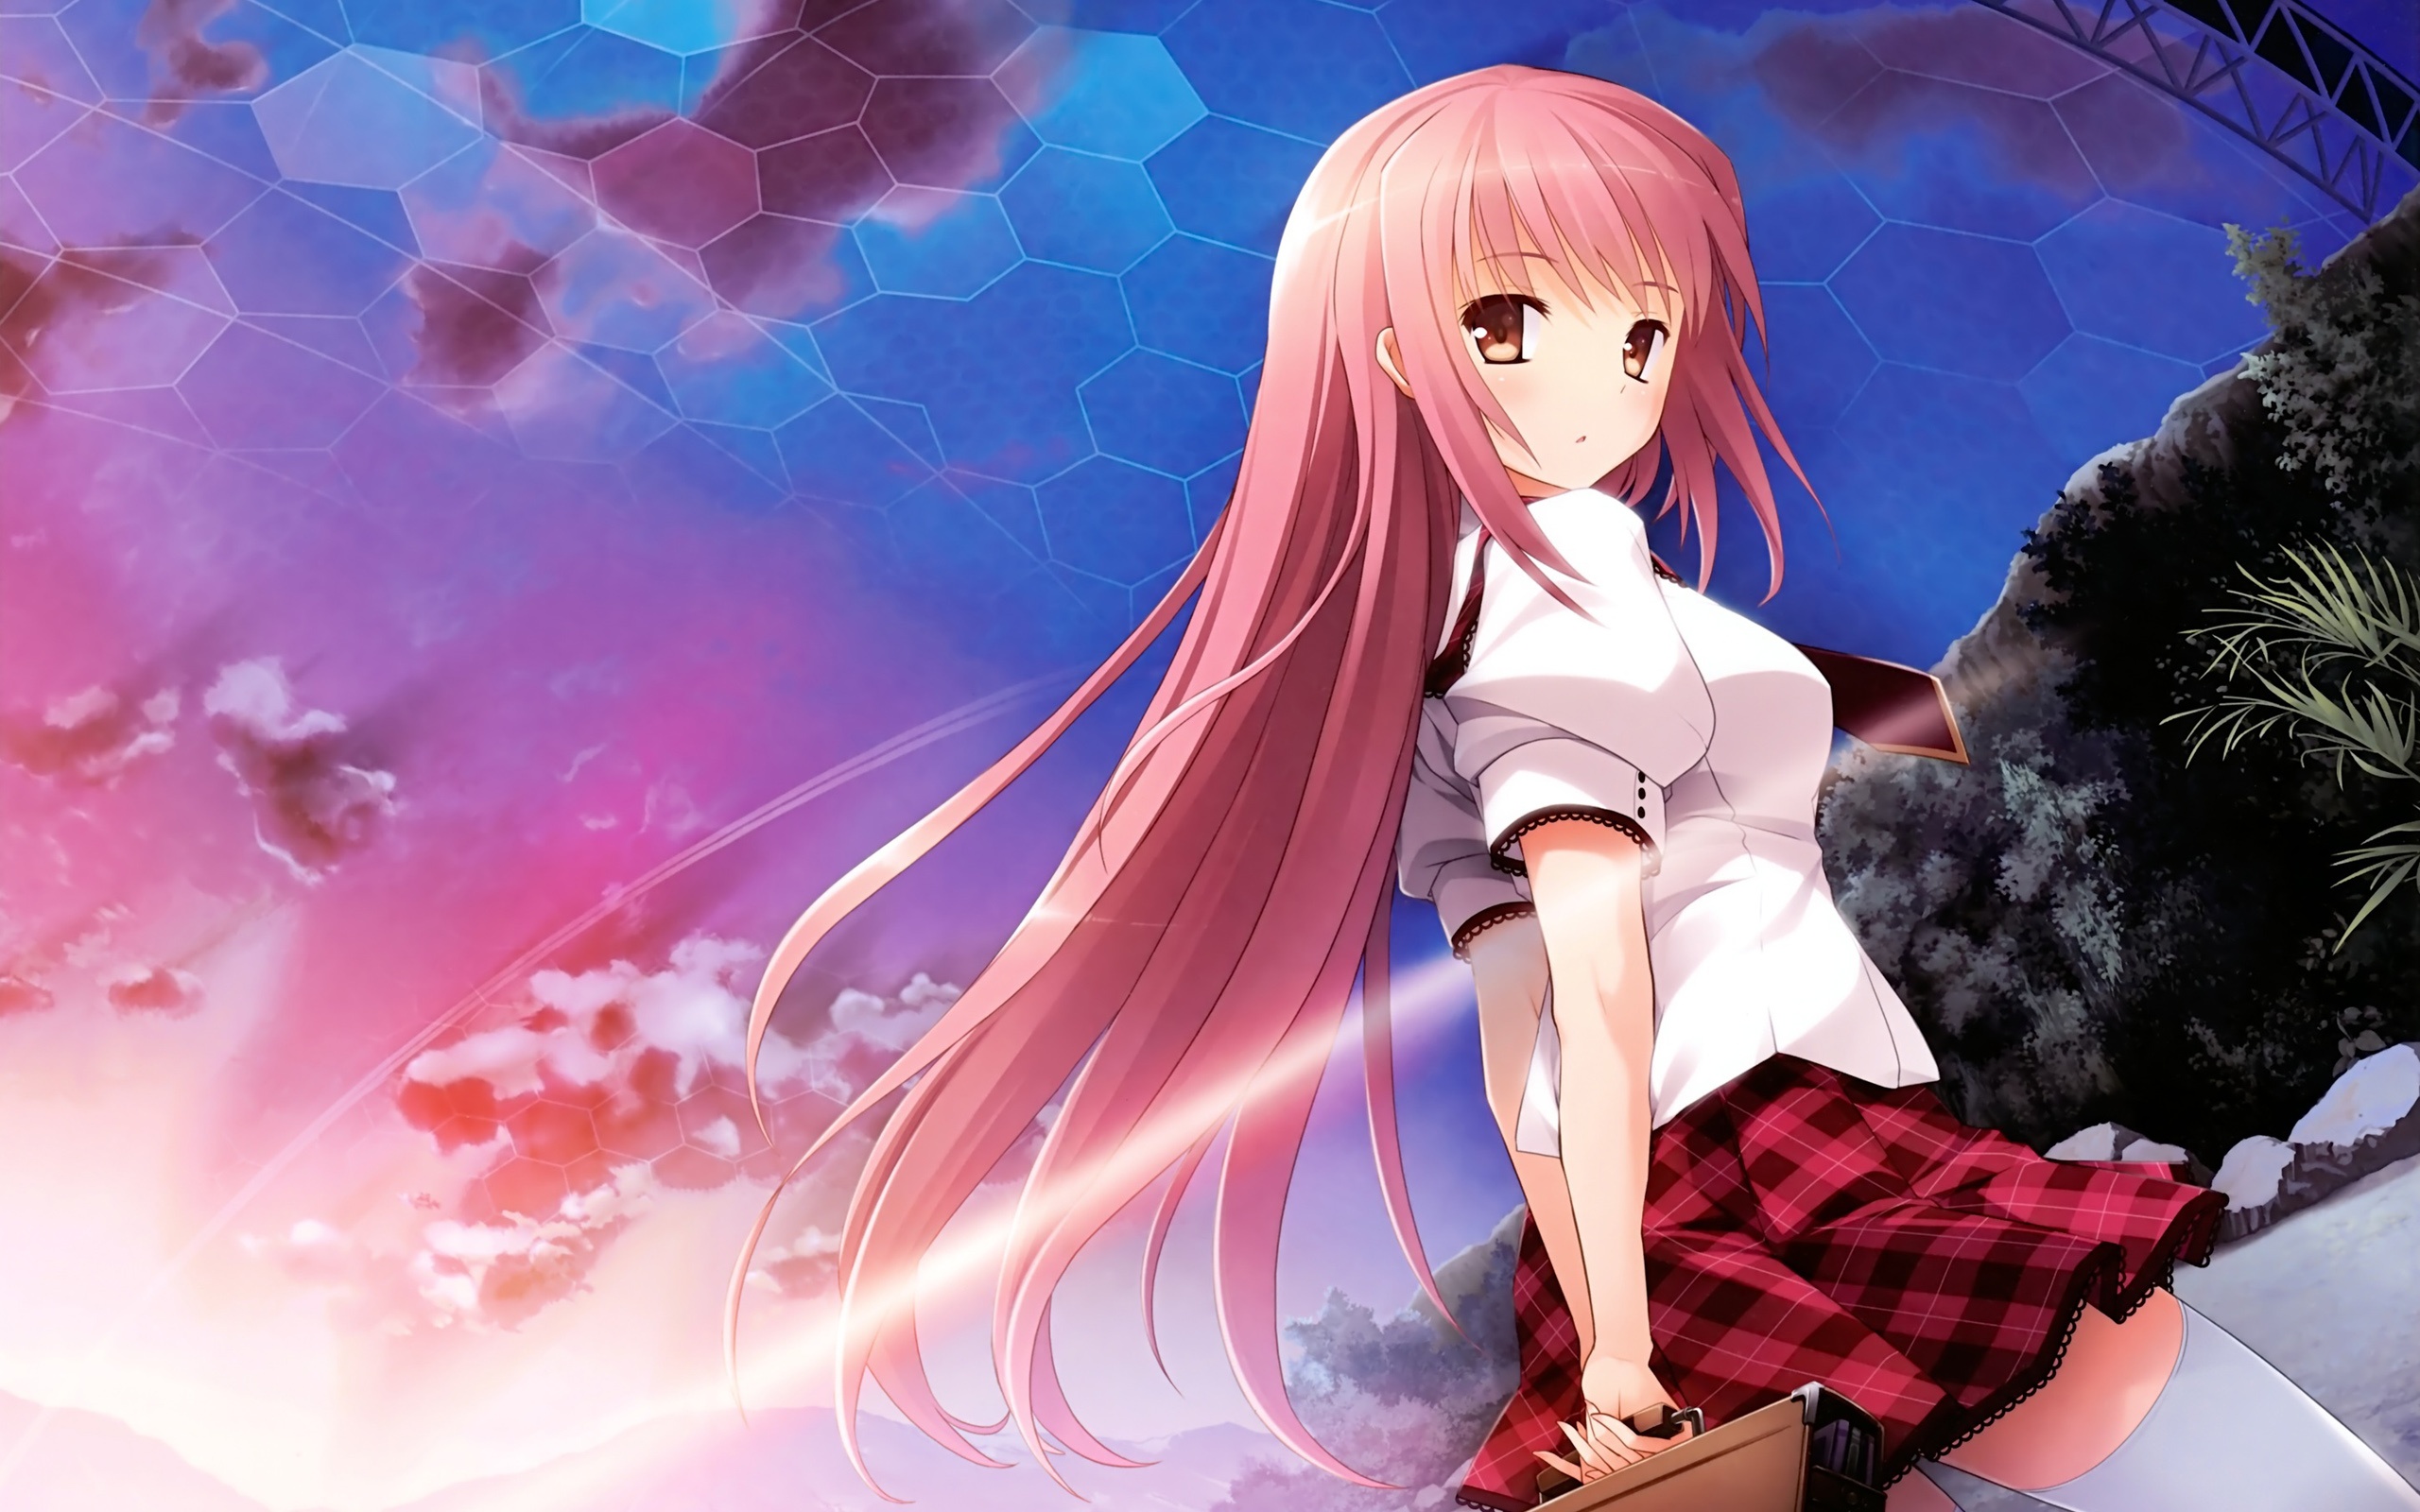 Anime Girl Wallpapers, HD Anime Girl Backgrounds, Free Images Download